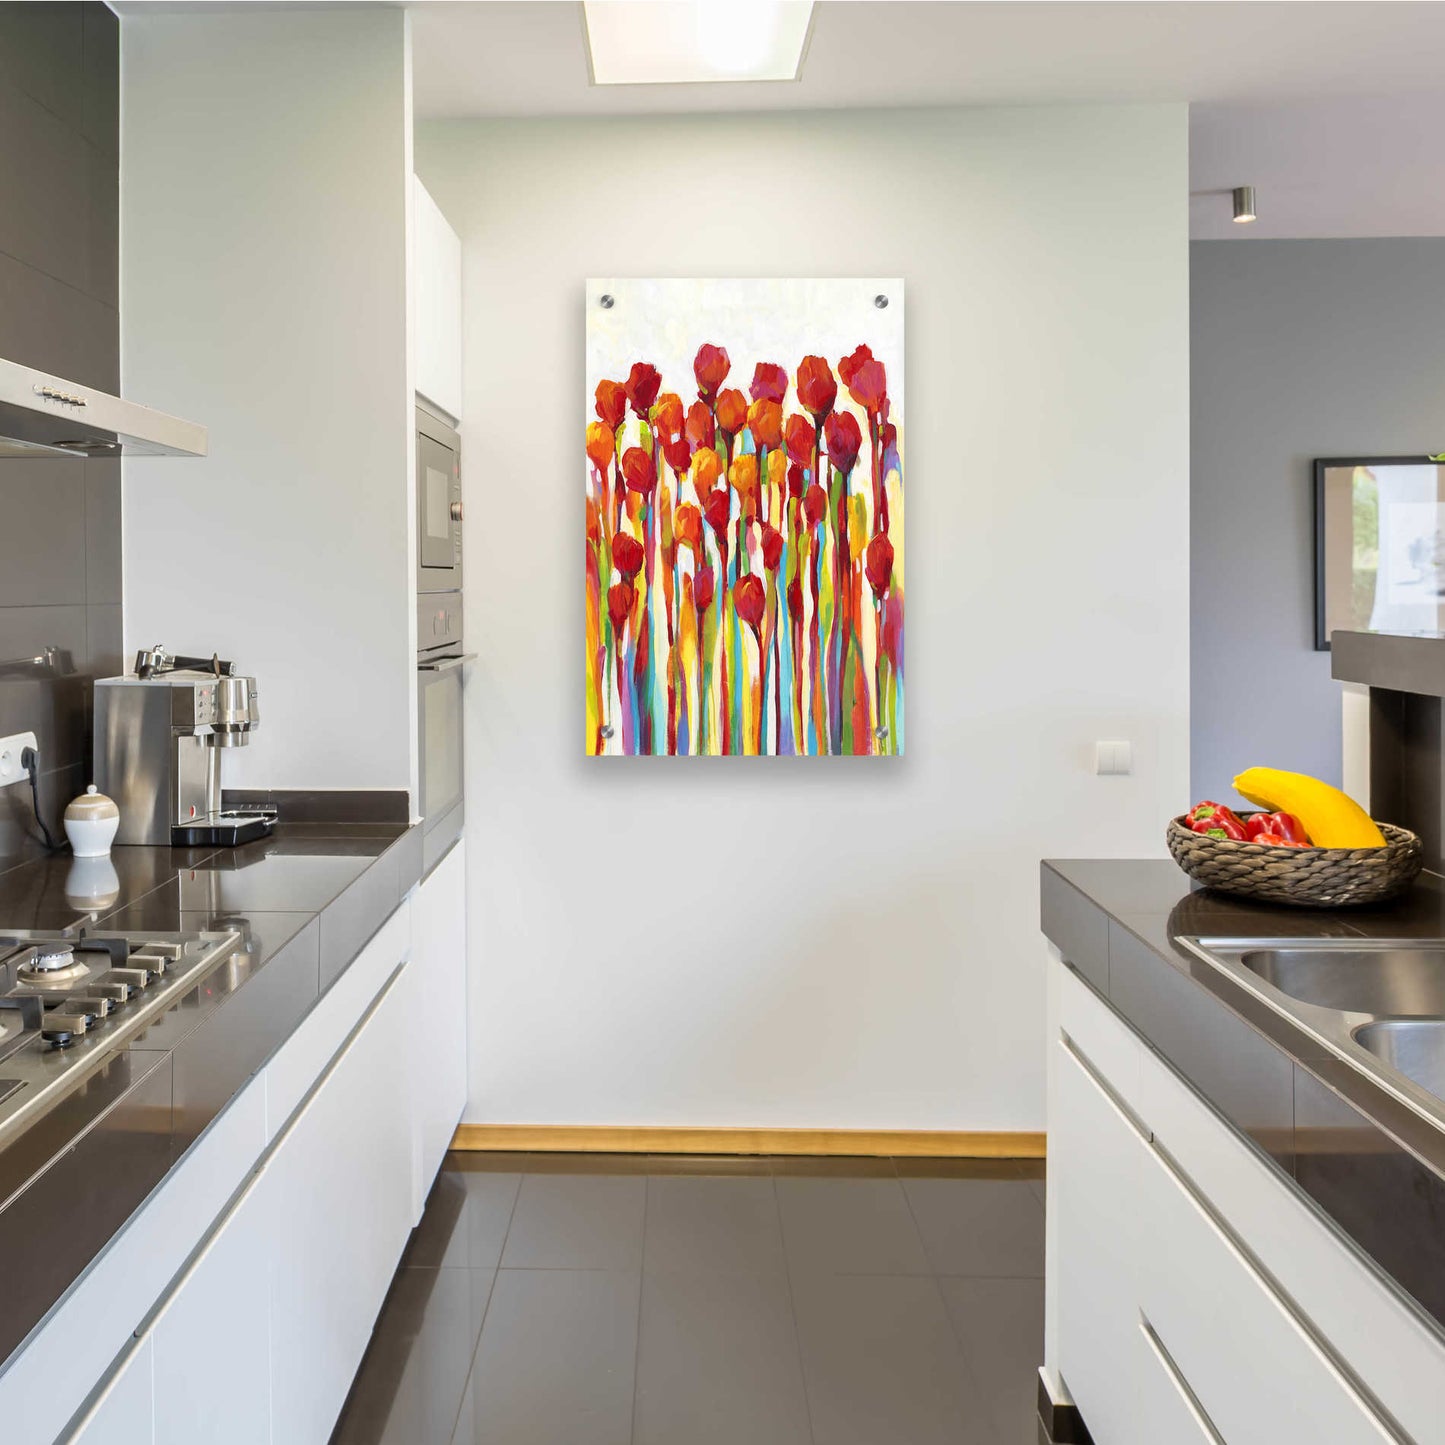 Epic Art 'Bursting with Color I' by Tim O'Toole, Acrylic Glass Wall Art,24x36